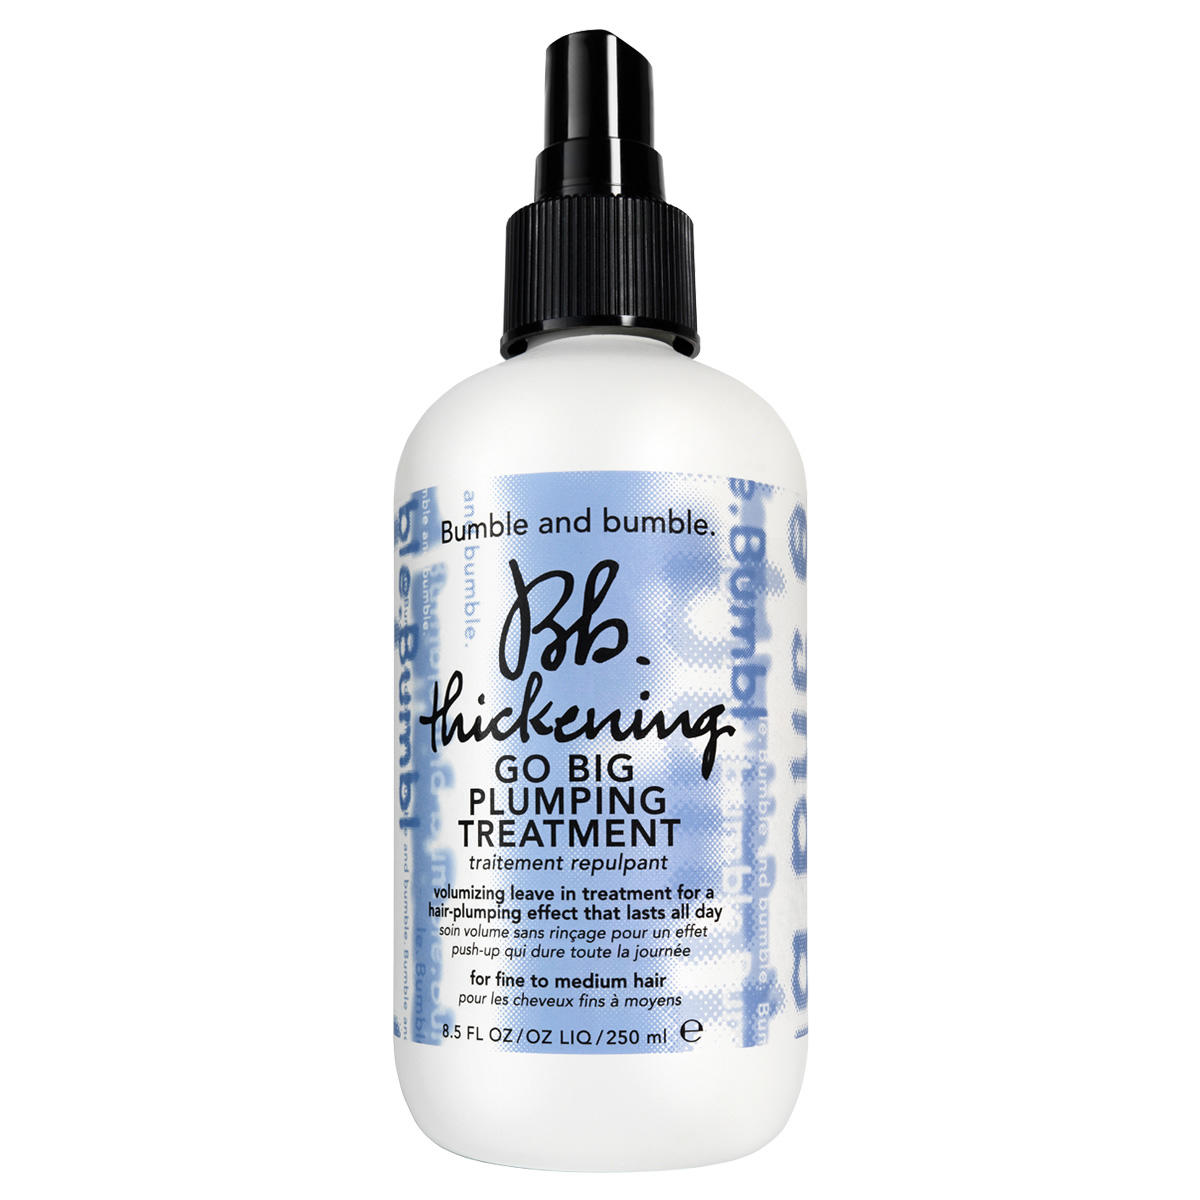 Bumble and bumble Bb. Thickening GO BIG PLUMPING TREATMENT 250 ml - 1